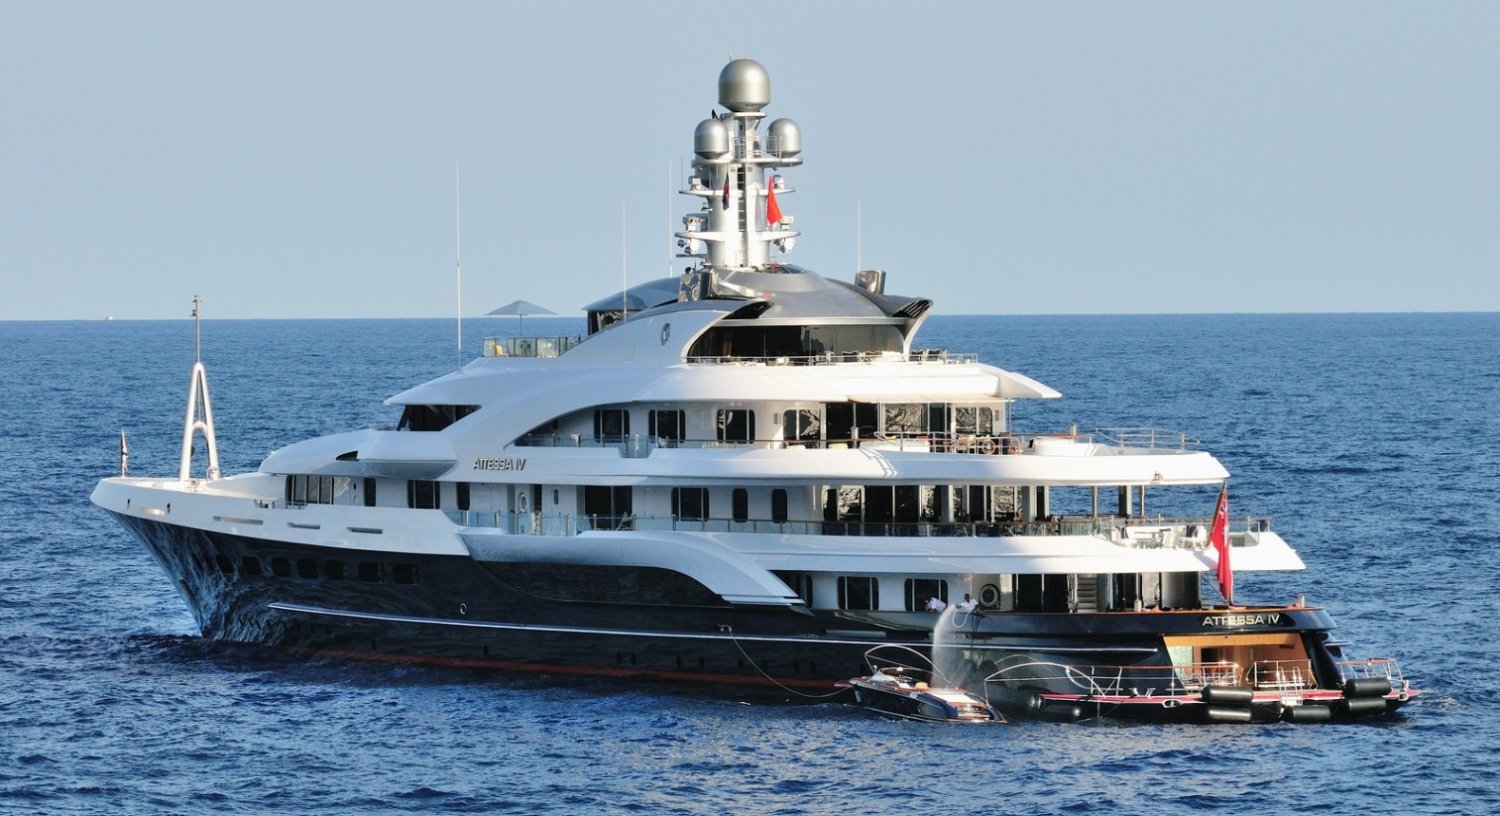 who owns attessa 4 yacht